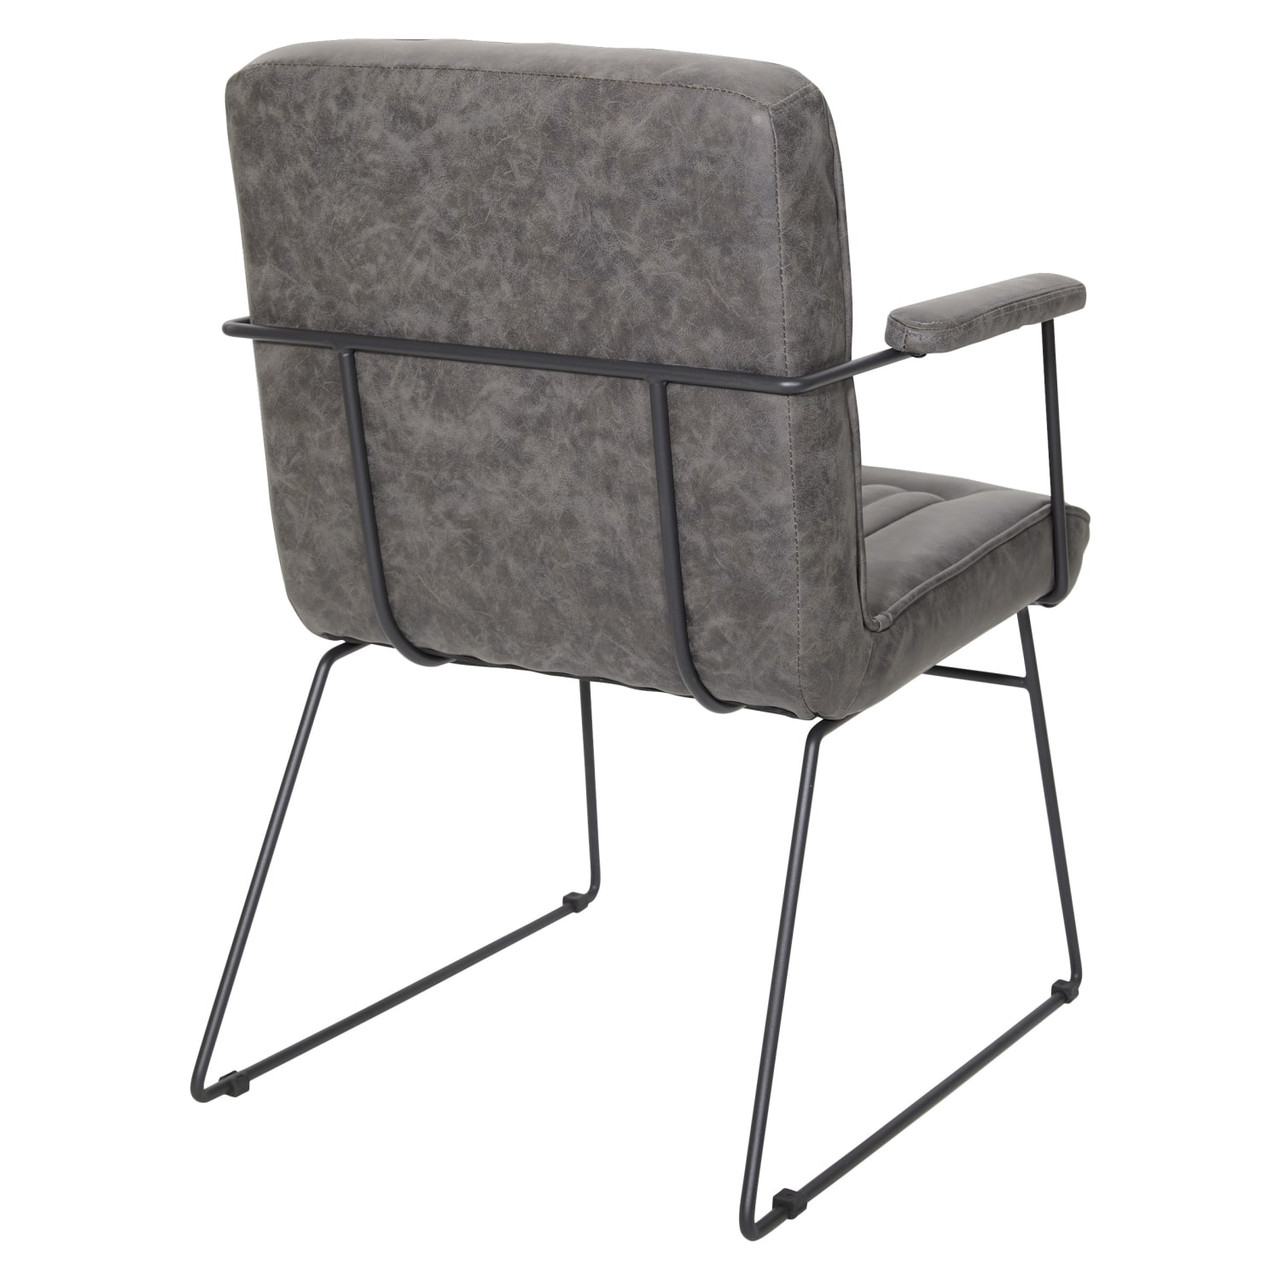 GT Chair in Charcoal Faux Leather with Black Sled Base